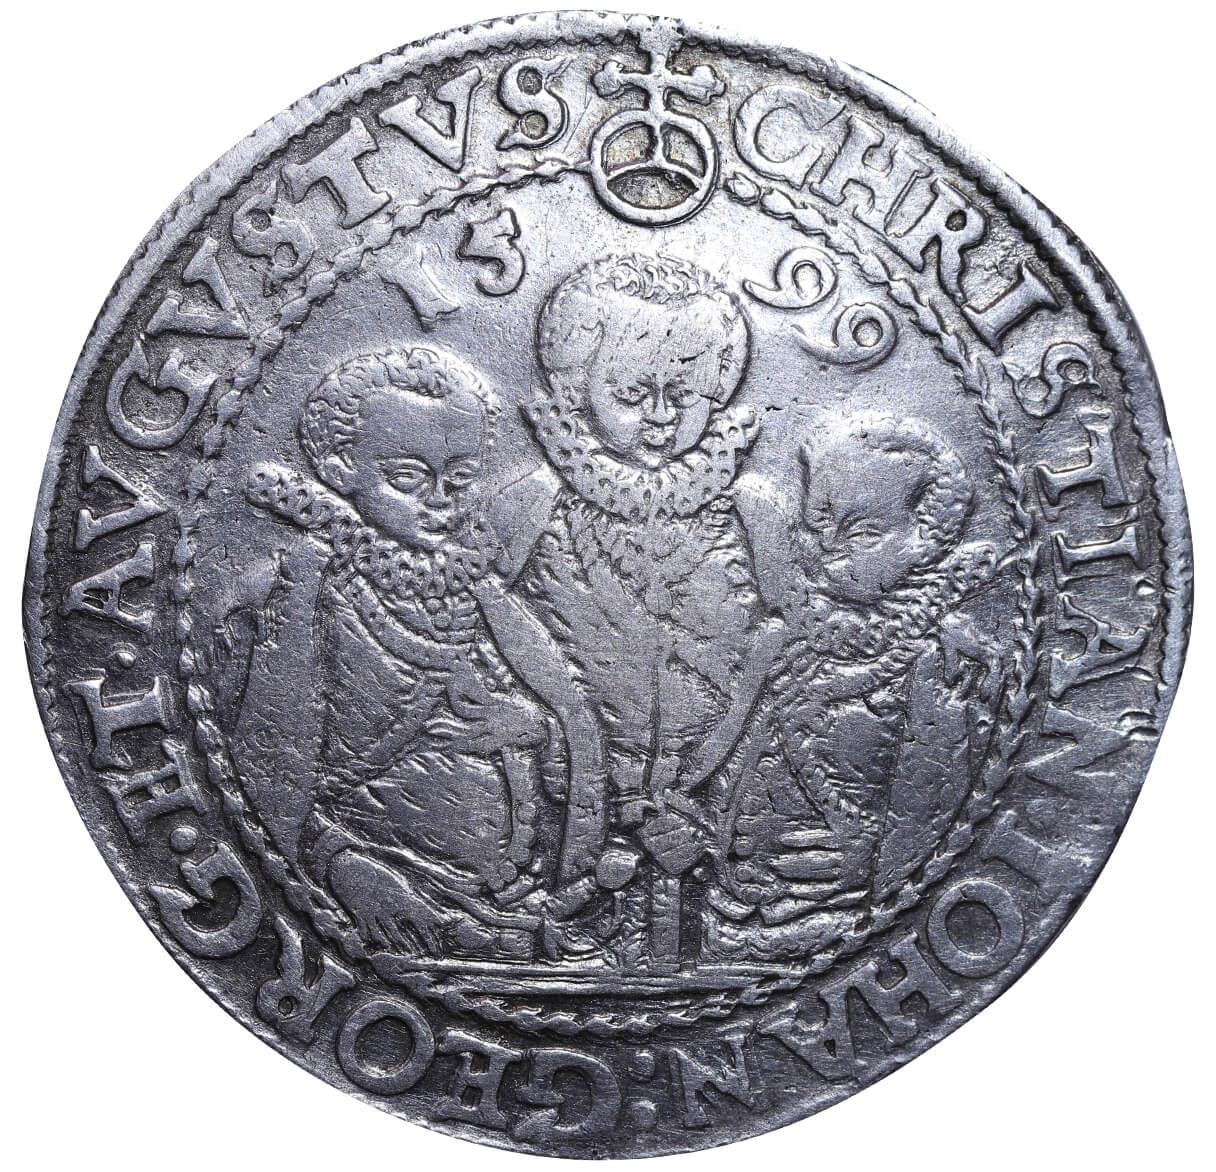 Electorate of Saxony, 1 Thaler, 1599 year, HB - Image 2 of 3